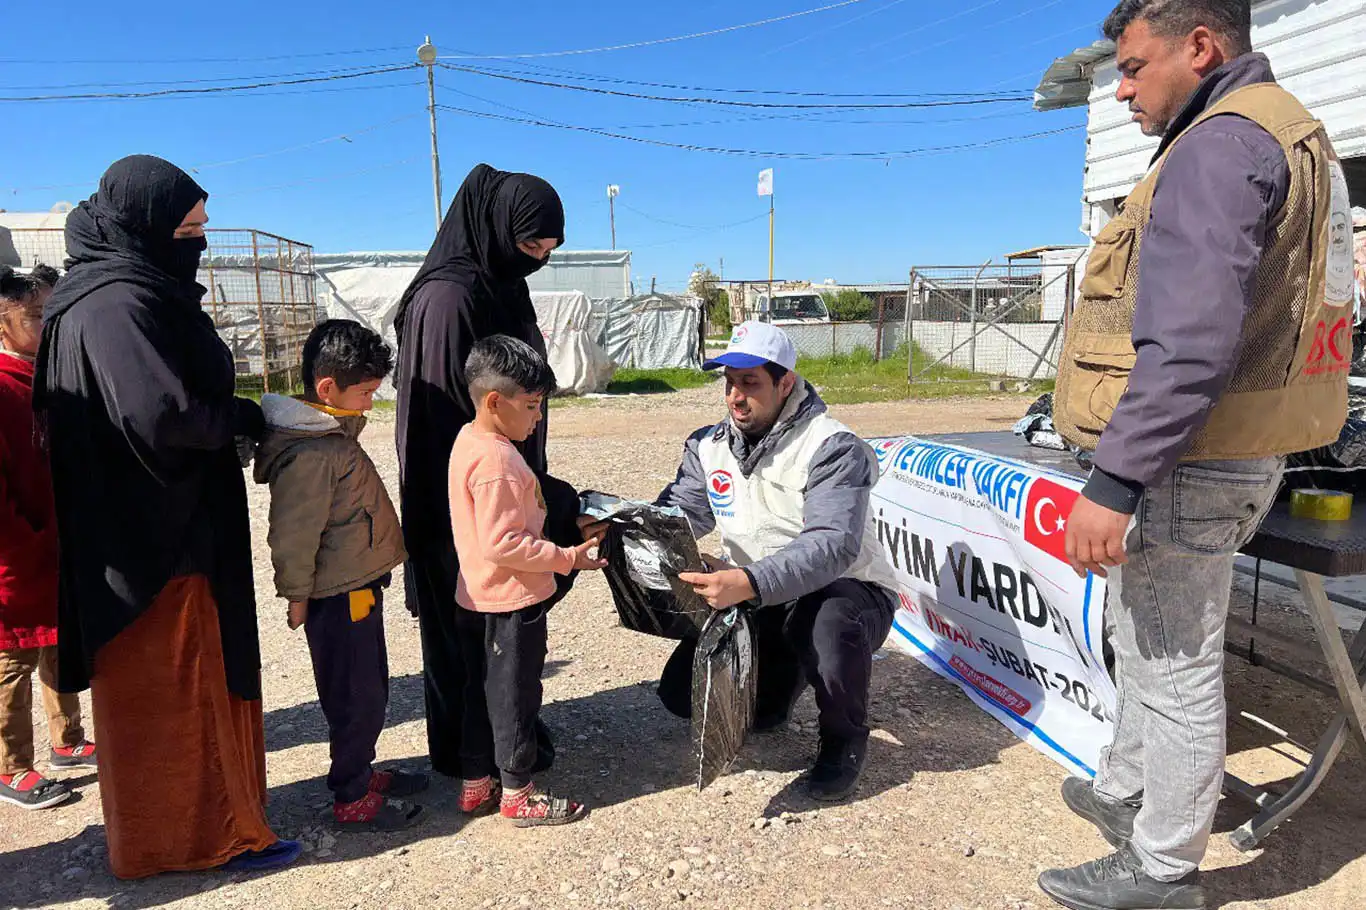 Orphans Foundation delivers humanitarian aid to families displaced by Mosul war